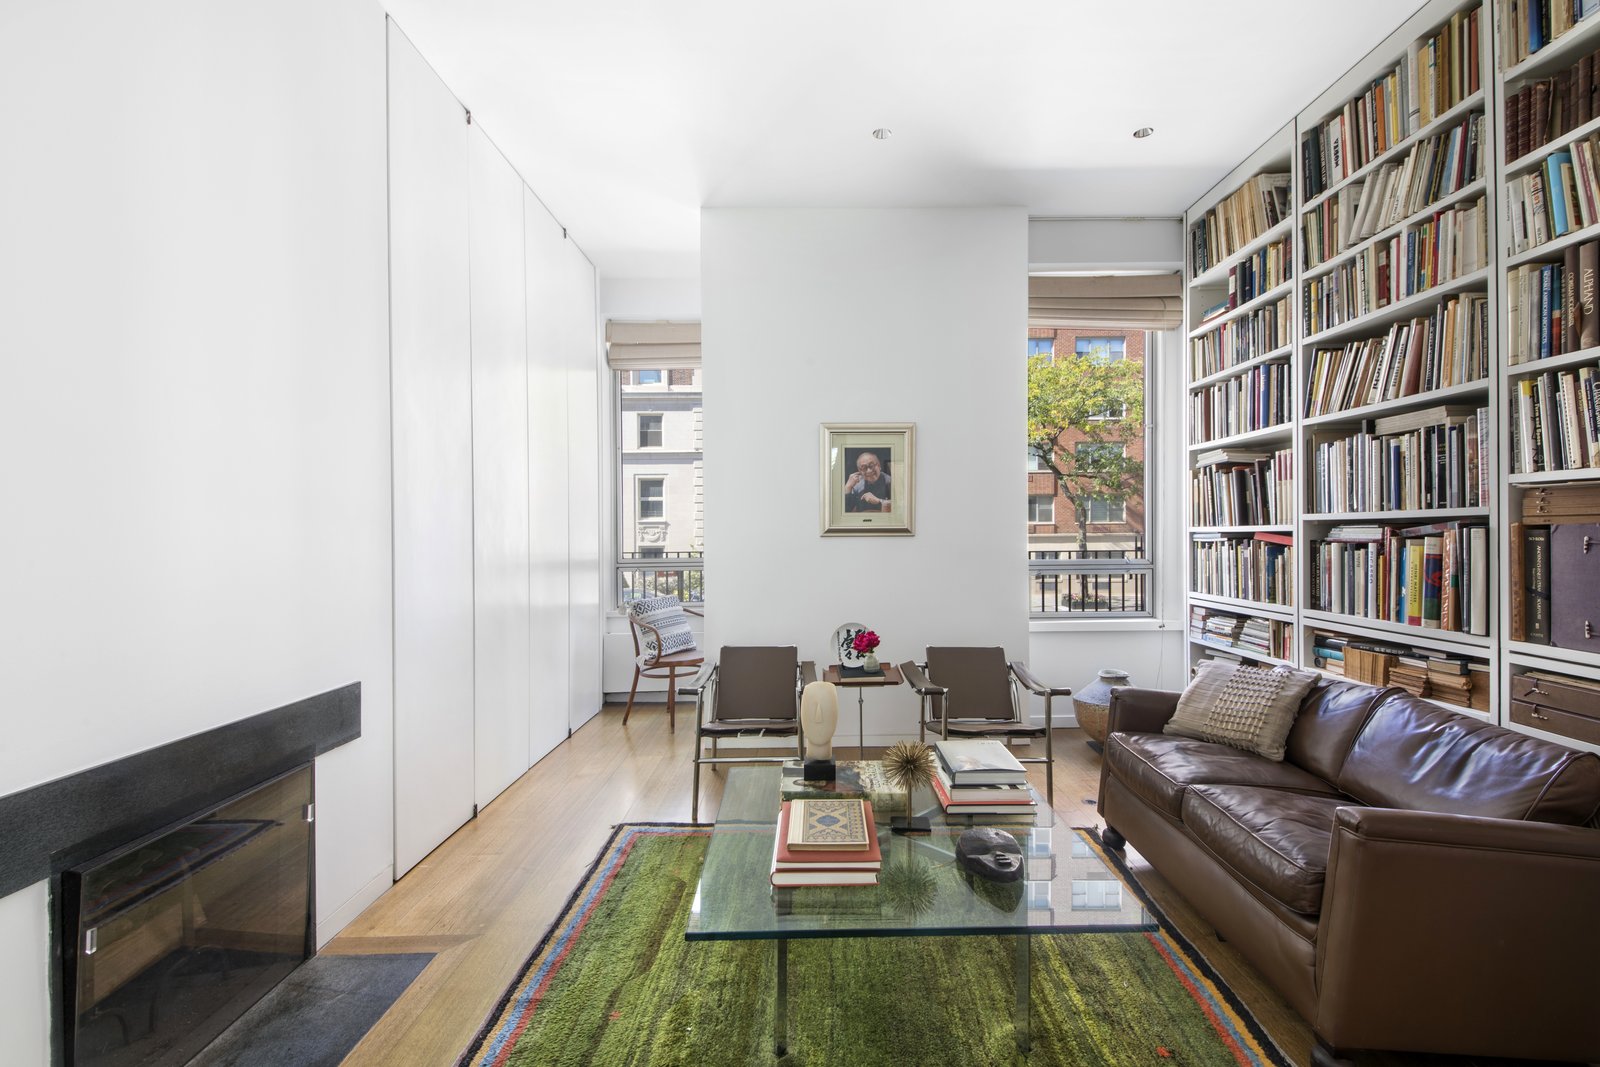 Set on the parlor level of the home is a large and airy library, which can easily be converted into a fifth bedroom. Floor-to-ceiling bookshelves (designed by Pei) stretch across one wall, while bespoke doors on the opposite side hide even more storage.